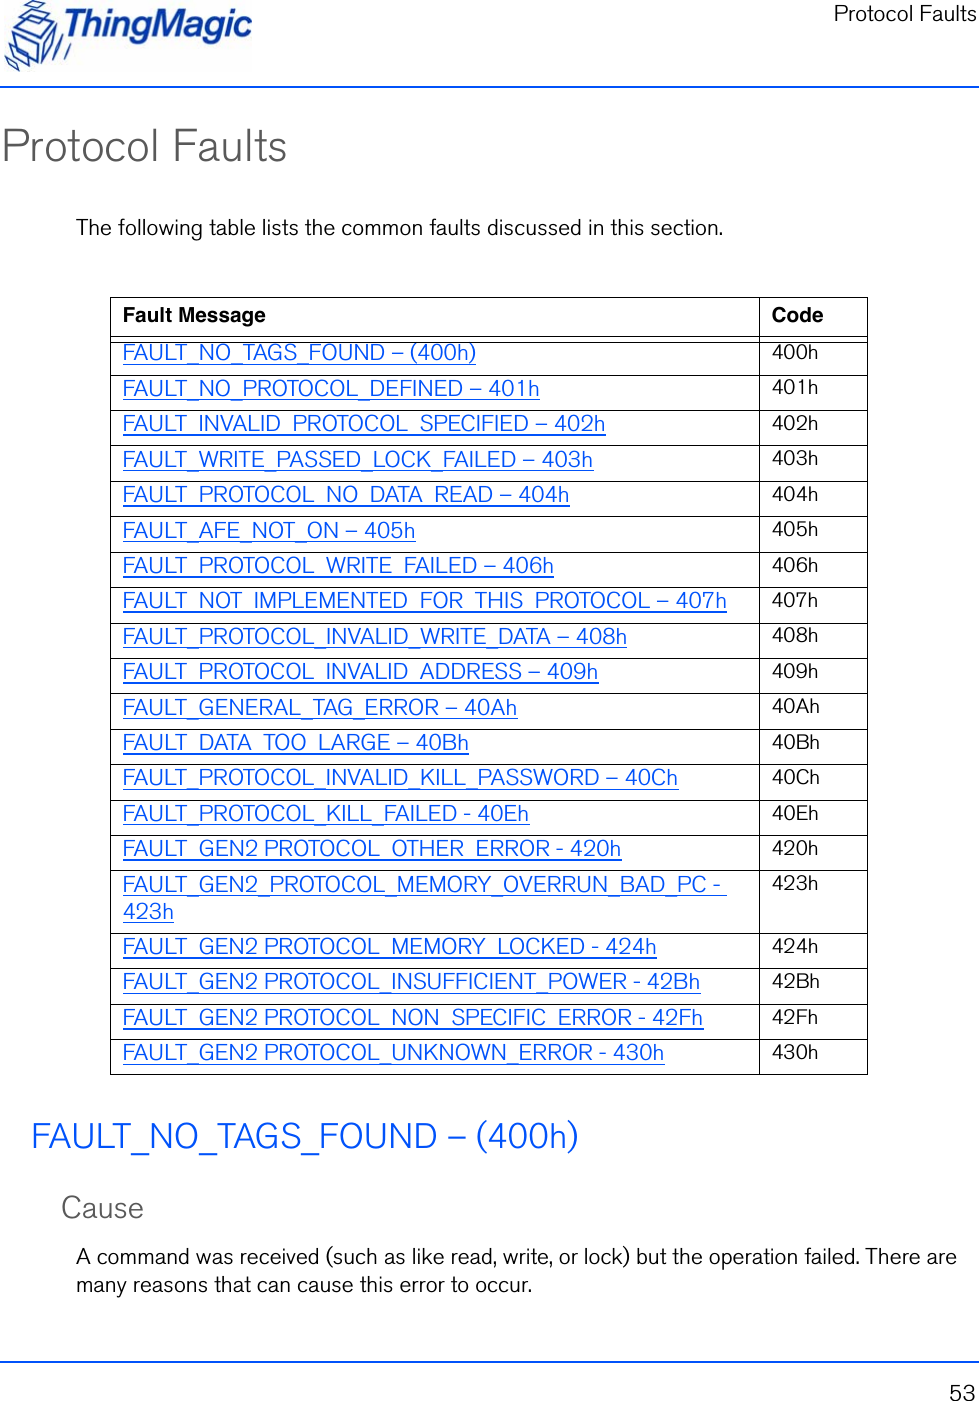 Protocol Faults53Protocol FaultsThe following table lists the common faults discussed in this section.FAULT_NO_TAGS_FOUND – (400h)CauseA command was received (such as like read, write, or lock) but the operation failed. There are many reasons that can cause this error to occur. Fault Message CodeFAULT_NO_TAGS_FOUND – (400h) 400hFAULT_NO_PROTOCOL_DEFINED – 401h 401hFAULT_INVALID_PROTOCOL_SPECIFIED – 402h 402hFAULT_WRITE_PASSED_LOCK_FAILED – 403h 403hFAULT_PROTOCOL_NO_DATA_READ – 404h 404hFAULT_AFE_NOT_ON – 405h 405hFAULT_PROTOCOL_WRITE_FAILED – 406h 406hFAULT_NOT_IMPLEMENTED_FOR_THIS_PROTOCOL – 407h 407hFAULT_PROTOCOL_INVALID_WRITE_DATA – 408h 408hFAULT_PROTOCOL_INVALID_ADDRESS – 409h 409hFAULT_GENERAL_TAG_ERROR – 40Ah 40AhFAULT_DATA_TOO_LARGE – 40Bh 40BhFAULT_PROTOCOL_INVALID_KILL_PASSWORD – 40Ch 40ChFAULT_PROTOCOL_KILL_FAILED - 40Eh 40EhFAULT_GEN2 PROTOCOL_OTHER_ERROR - 420h 420hFAULT_GEN2_PROTOCOL_MEMORY_OVERRUN_BAD_PC - 423h423hFAULT_GEN2 PROTOCOL_MEMORY_LOCKED - 424h 424hFAULT_GEN2 PROTOCOL_INSUFFICIENT_POWER - 42Bh 42BhFAULT_GEN2 PROTOCOL_NON_SPECIFIC_ERROR - 42Fh 42FhFAULT_GEN2 PROTOCOL_UNKNOWN_ERROR - 430h 430h